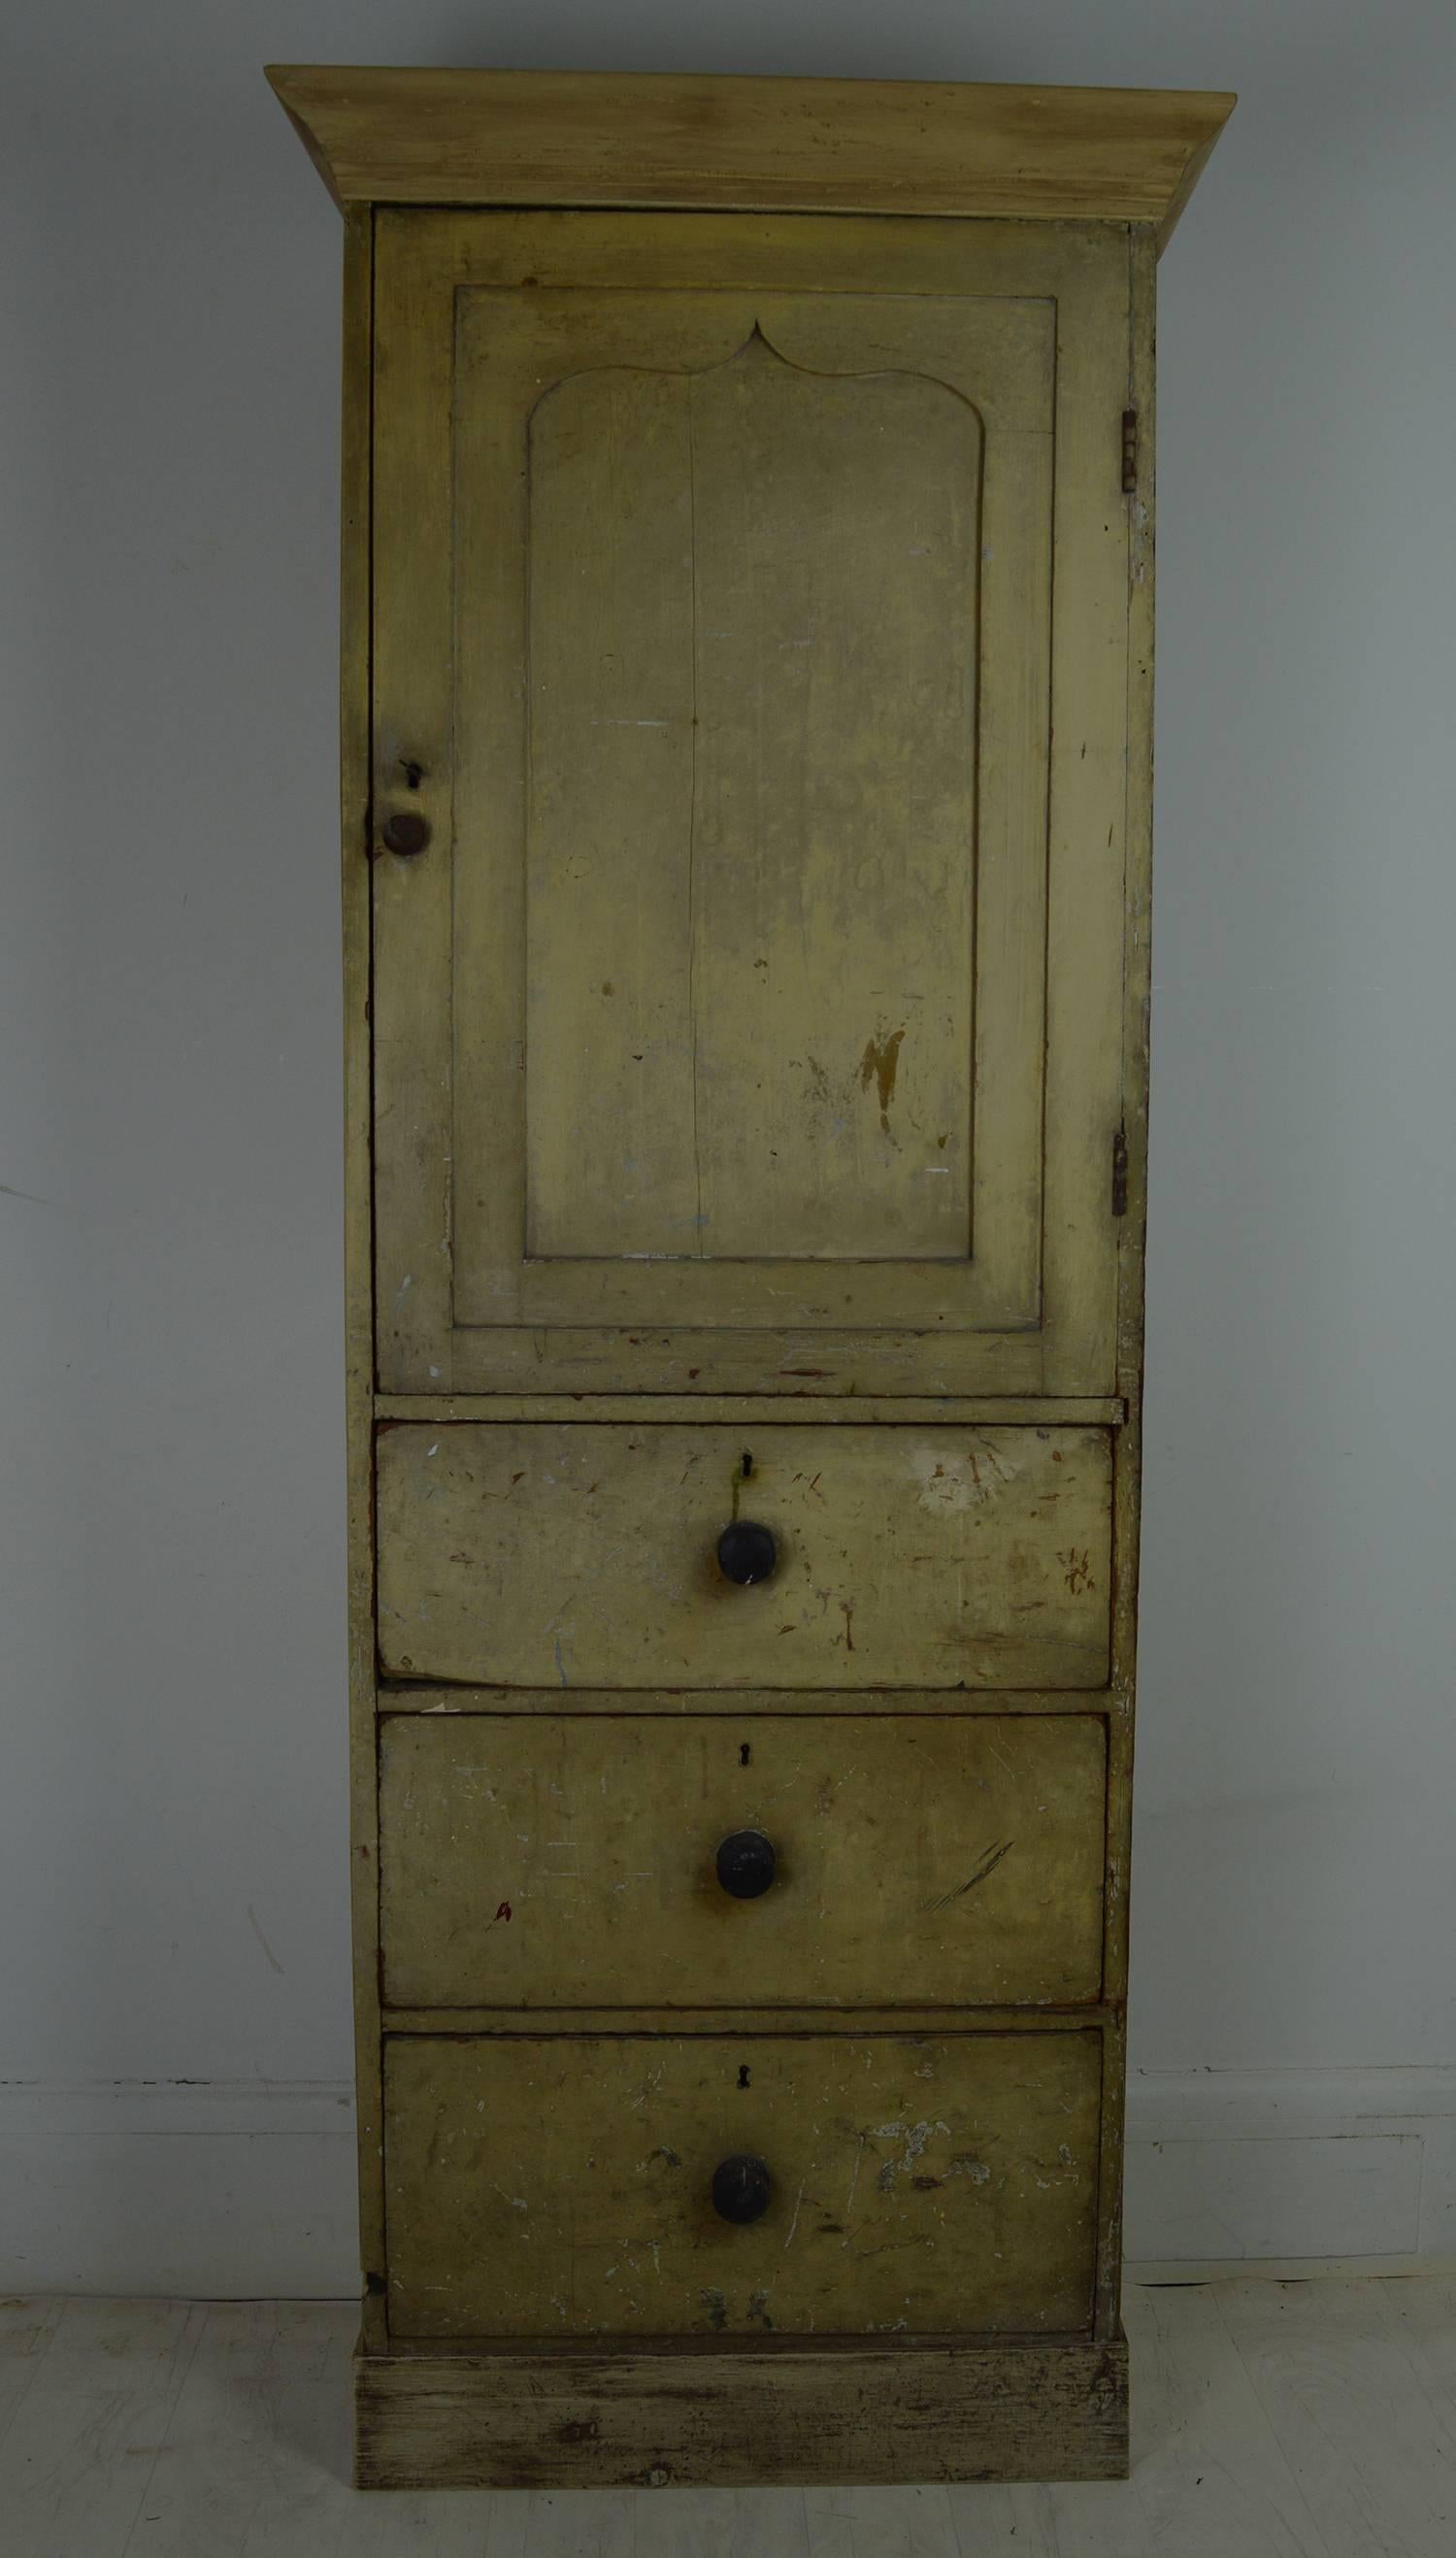 Wonderful slim painted housekeepers cupboard in a great pale yellow or ivory color.

Equally beautiful interior in an aquamarine or blue color.

The paint is mostly original.

The cornice and plinth are later additions made from old material.